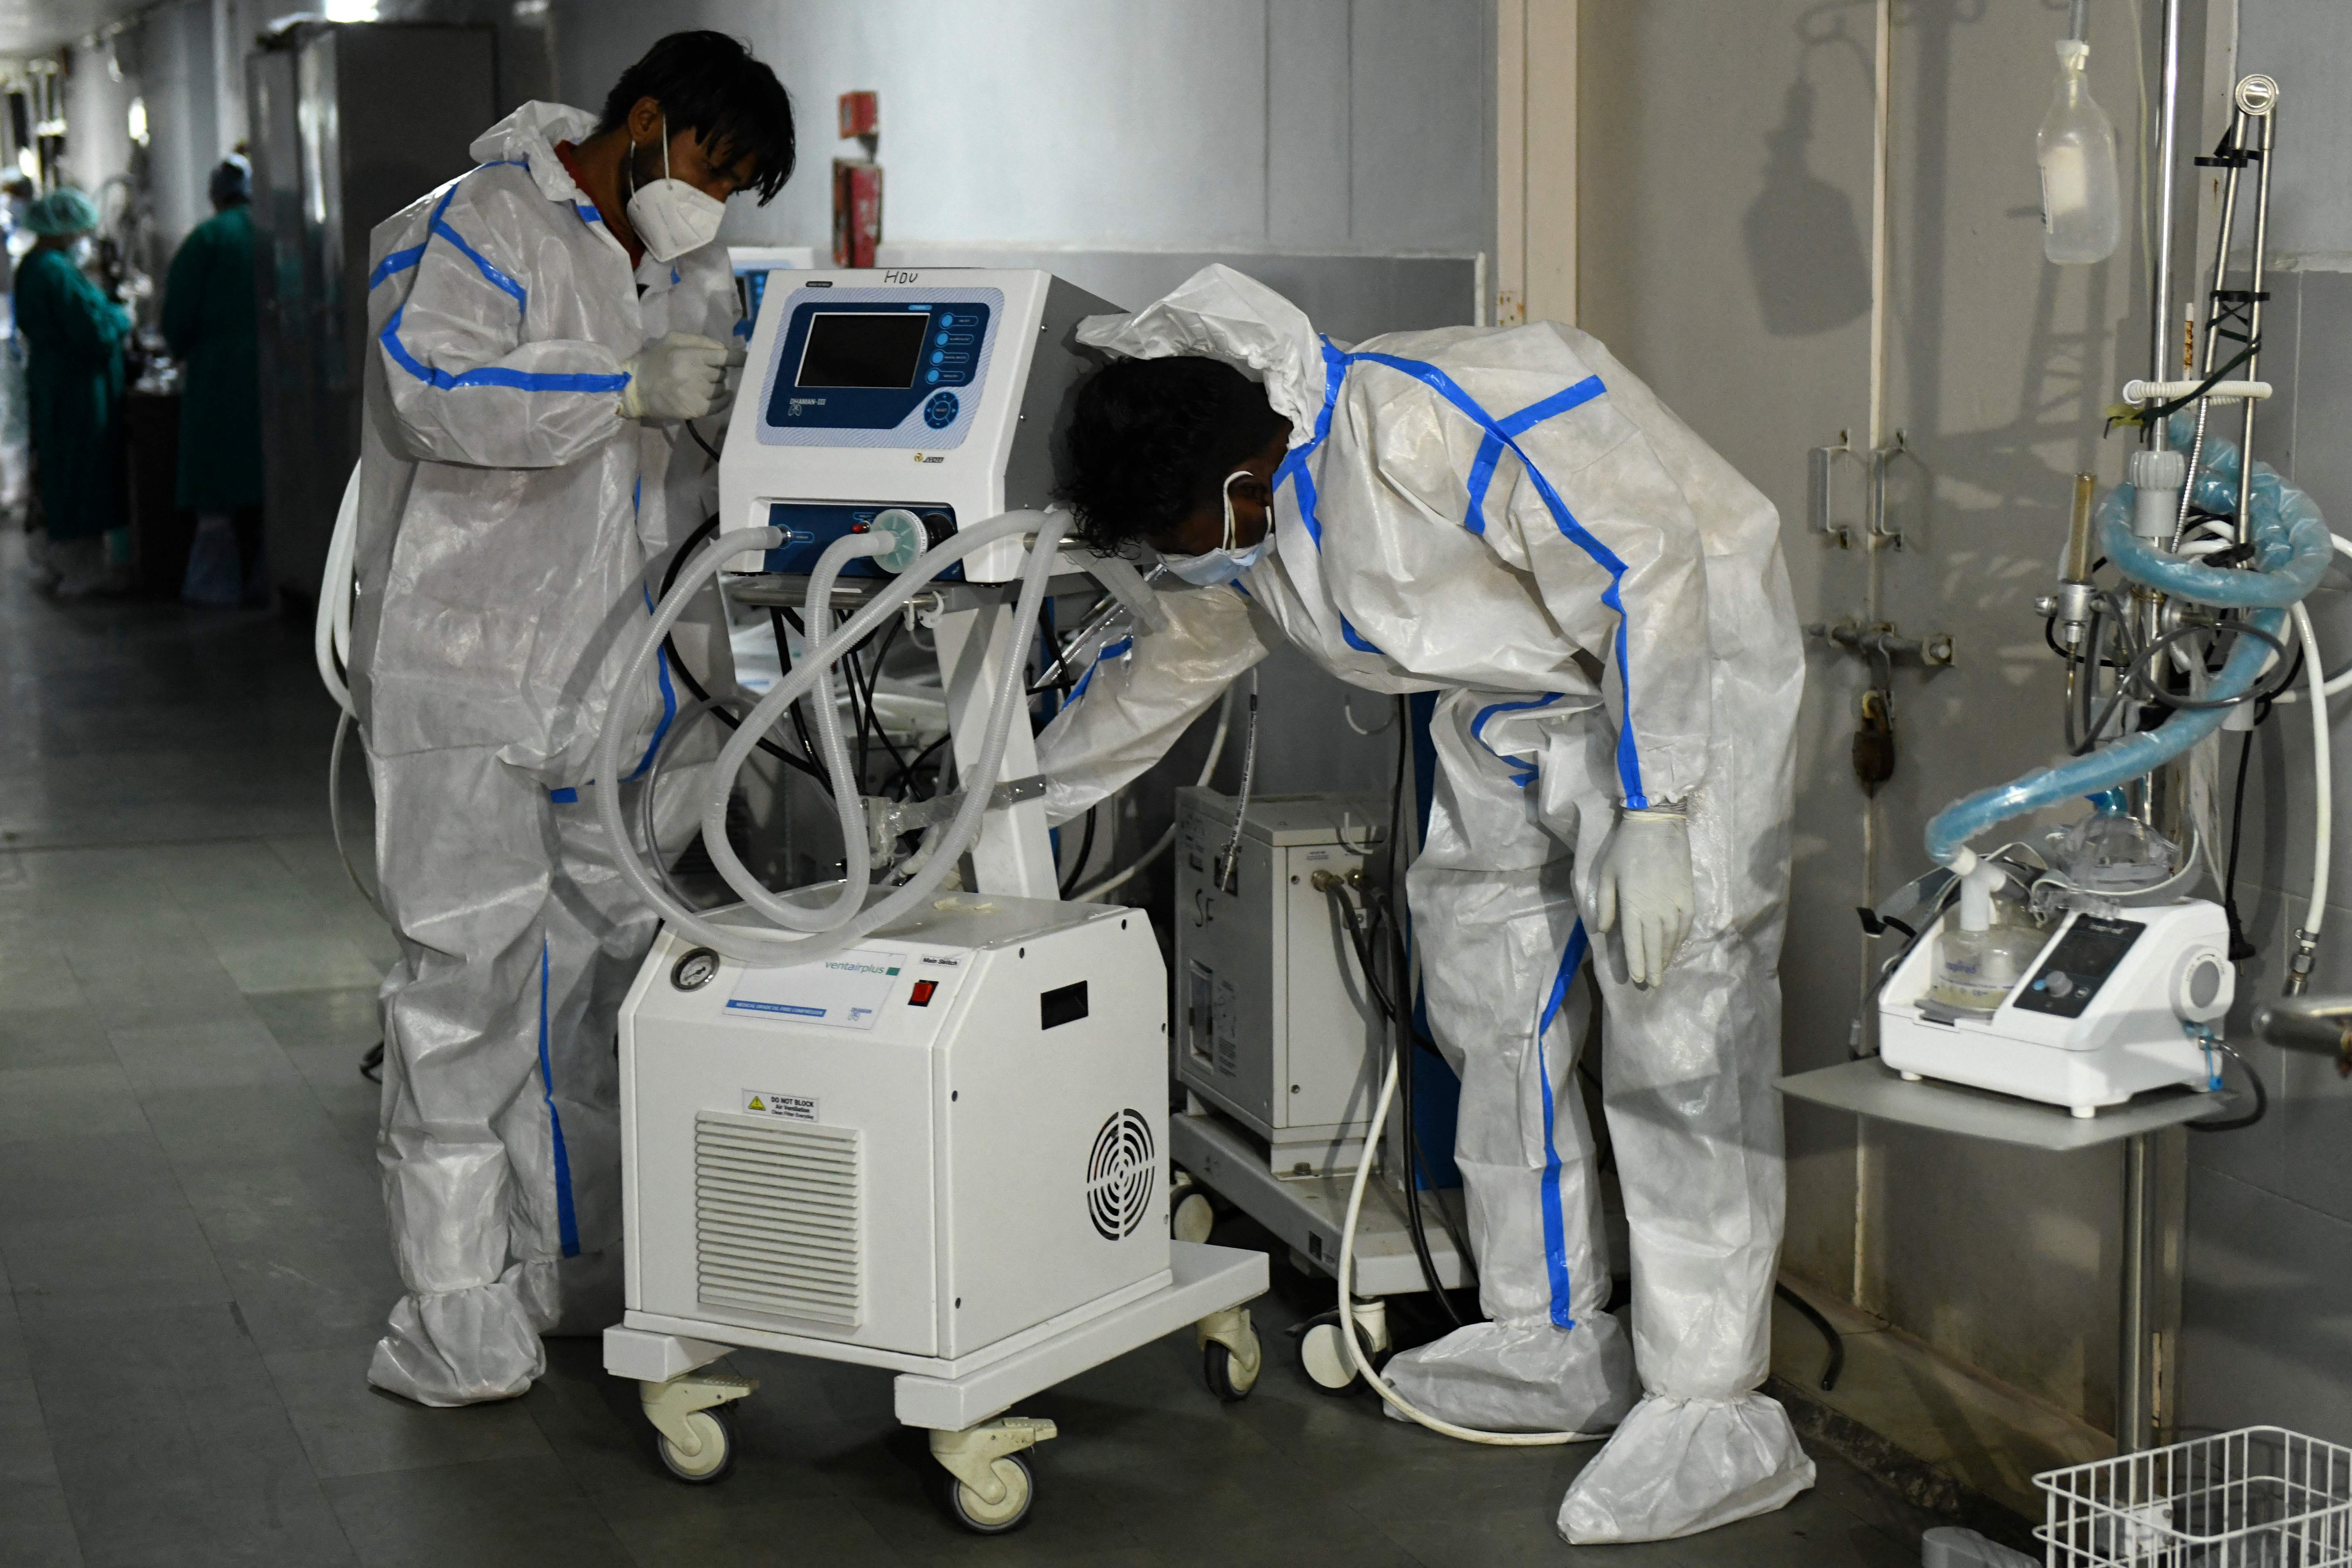 Health workers wearing protective gear place a defunct ventilator machine in the corridor of a hospital amid Covid-19 coronavirus pandemic in Amritsar